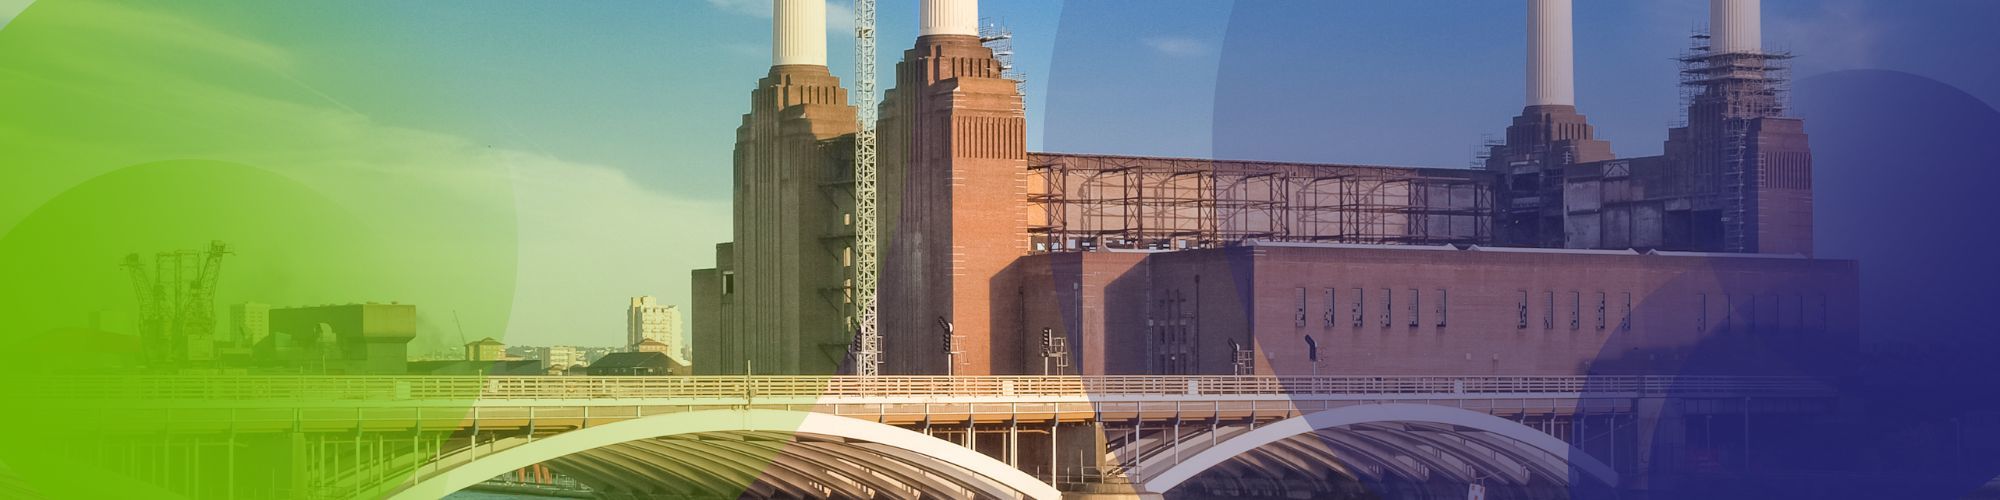 Battersea Power Station Redevelopment: Transforming an Iconic Landmark for a Vibrant Future